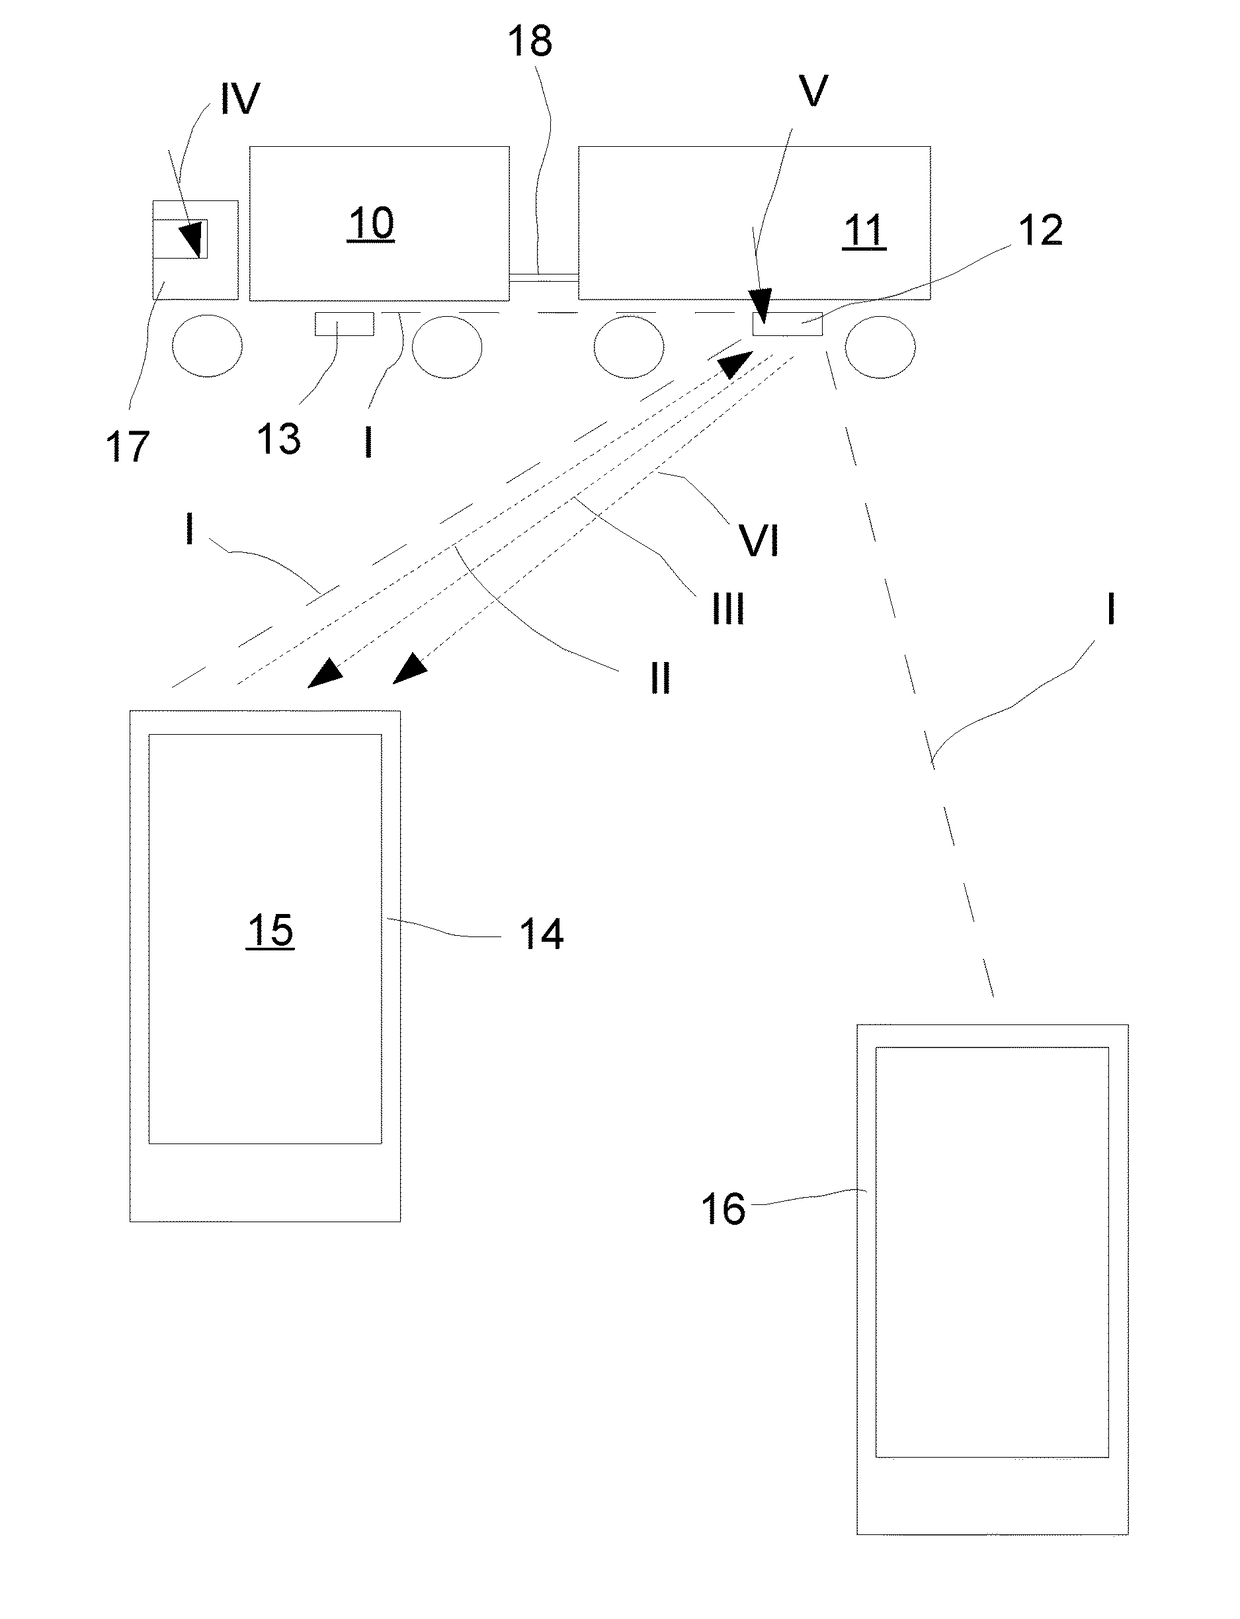 Method for authorization in a wireless vehicle network